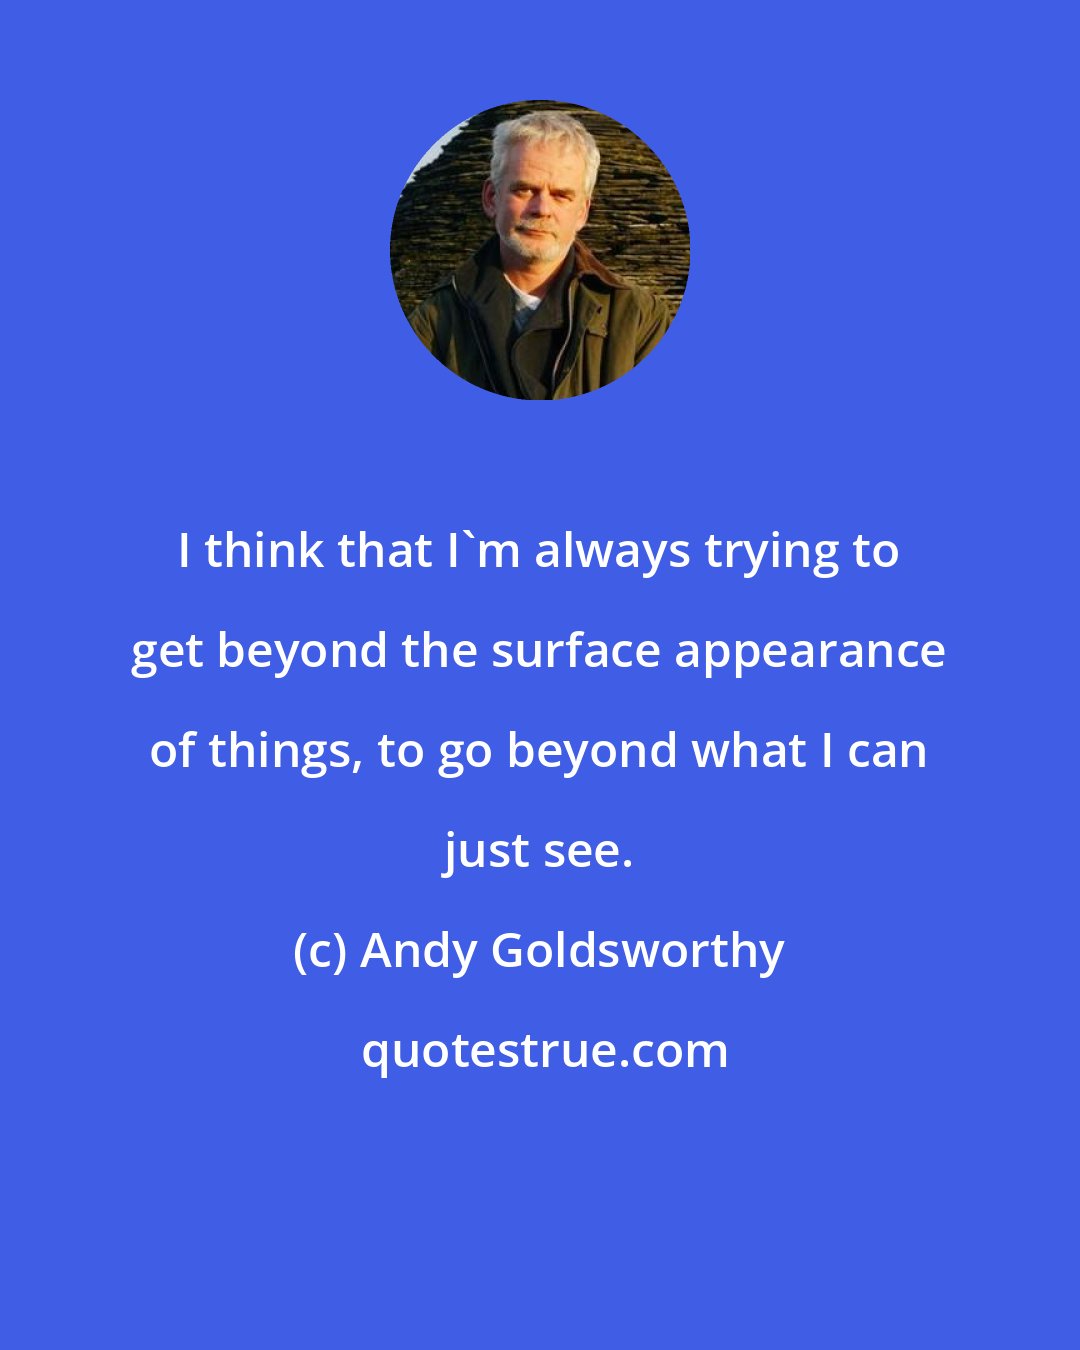 Andy Goldsworthy: I think that I'm always trying to get beyond the surface appearance of things, to go beyond what I can just see.